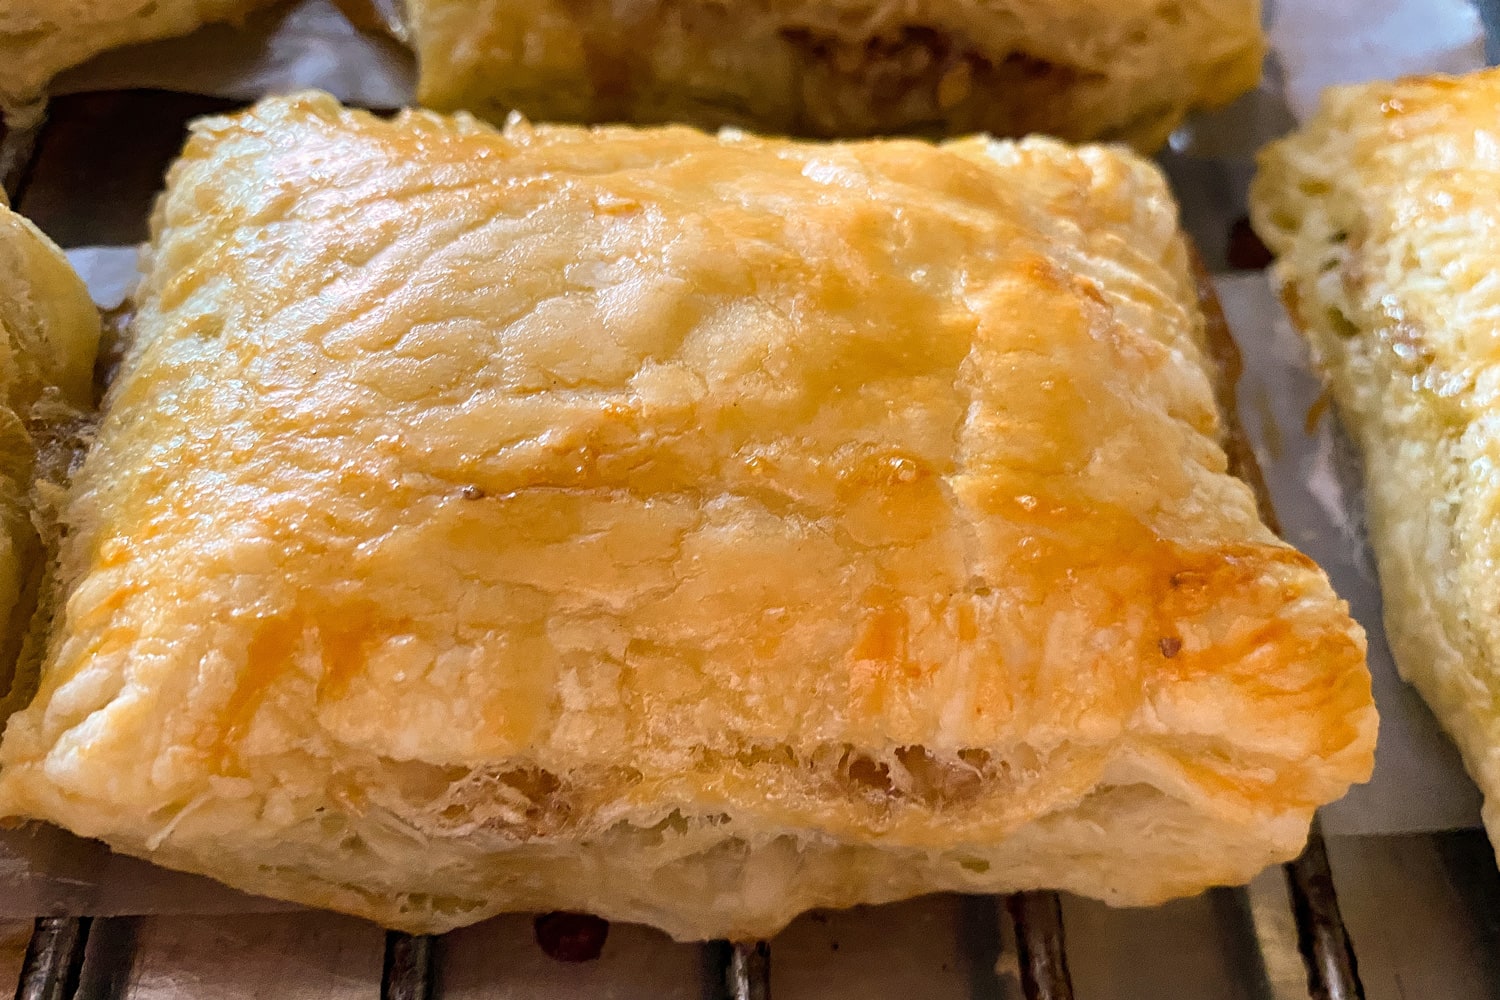 Puff pastry treats are baked and ready to eat.